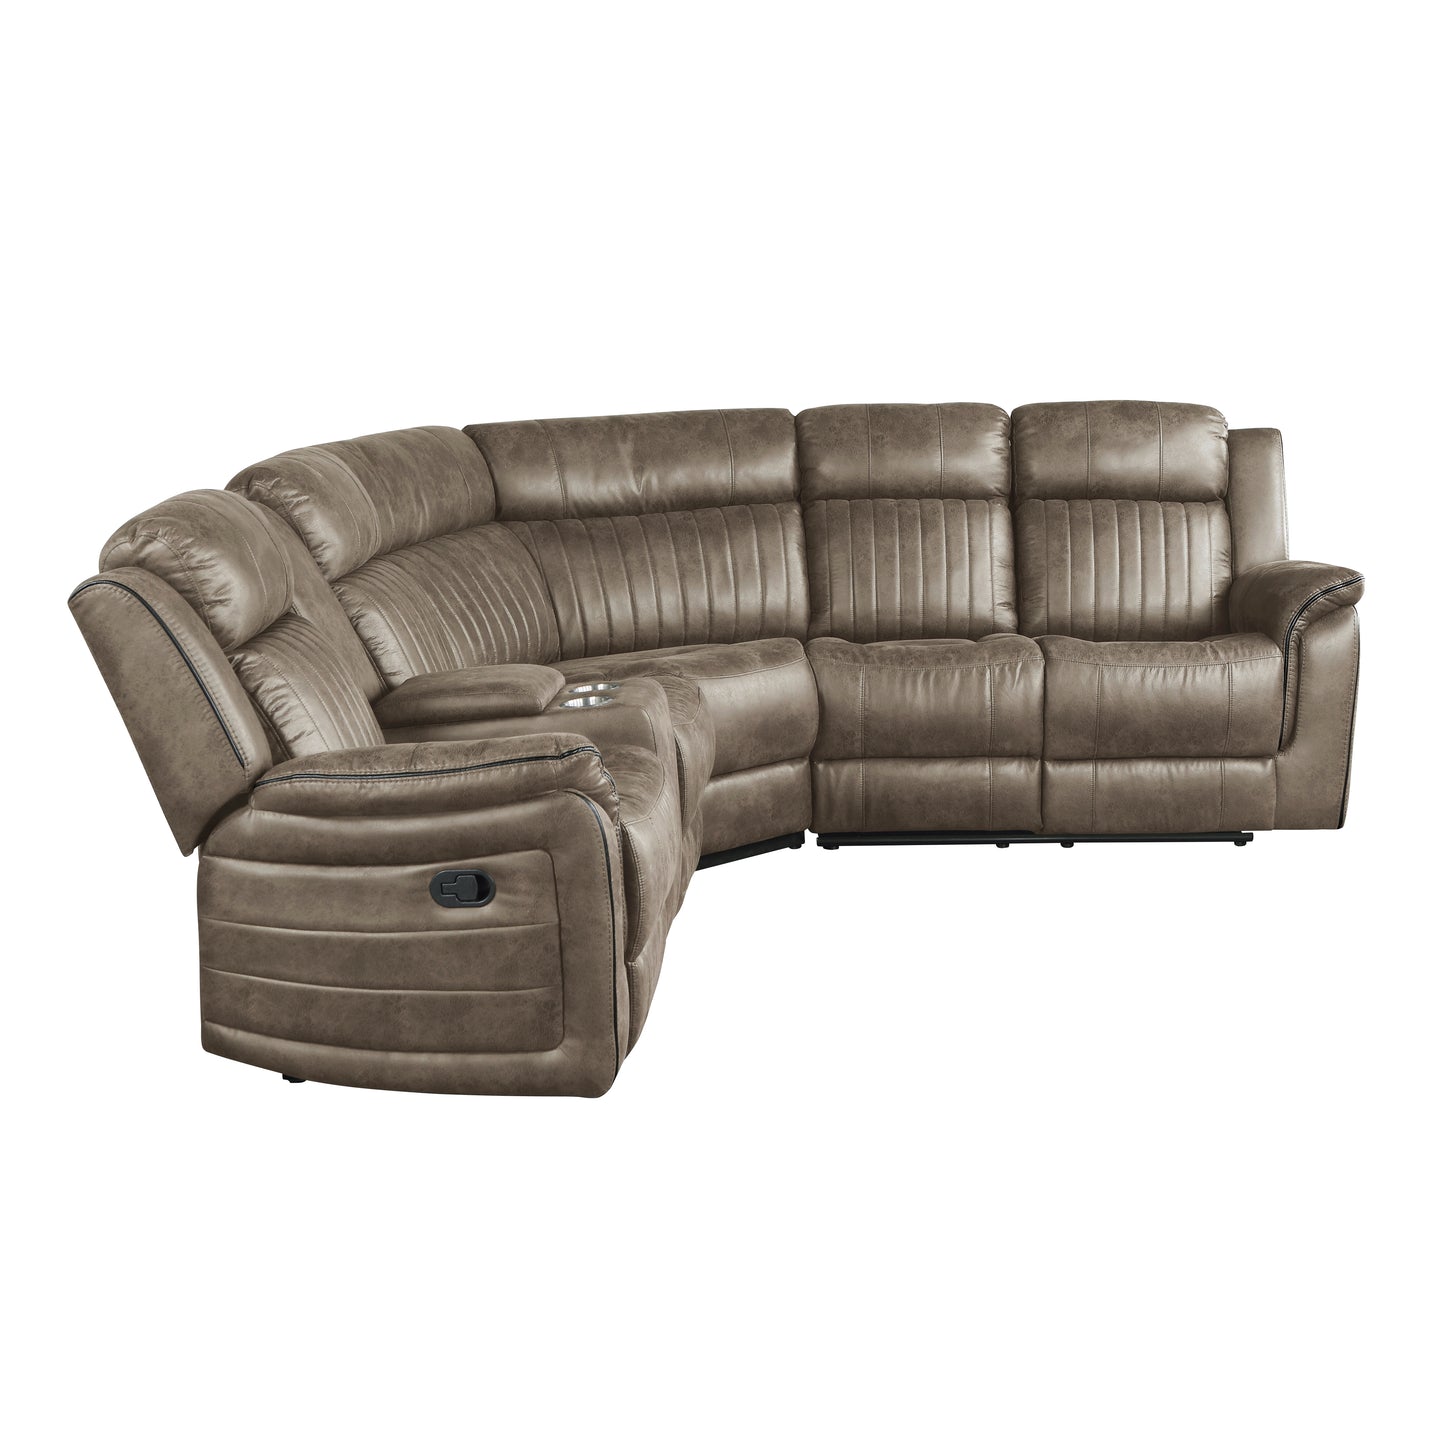 Centeroak 3-Piece Reclining Sectional with Left Console BROWN